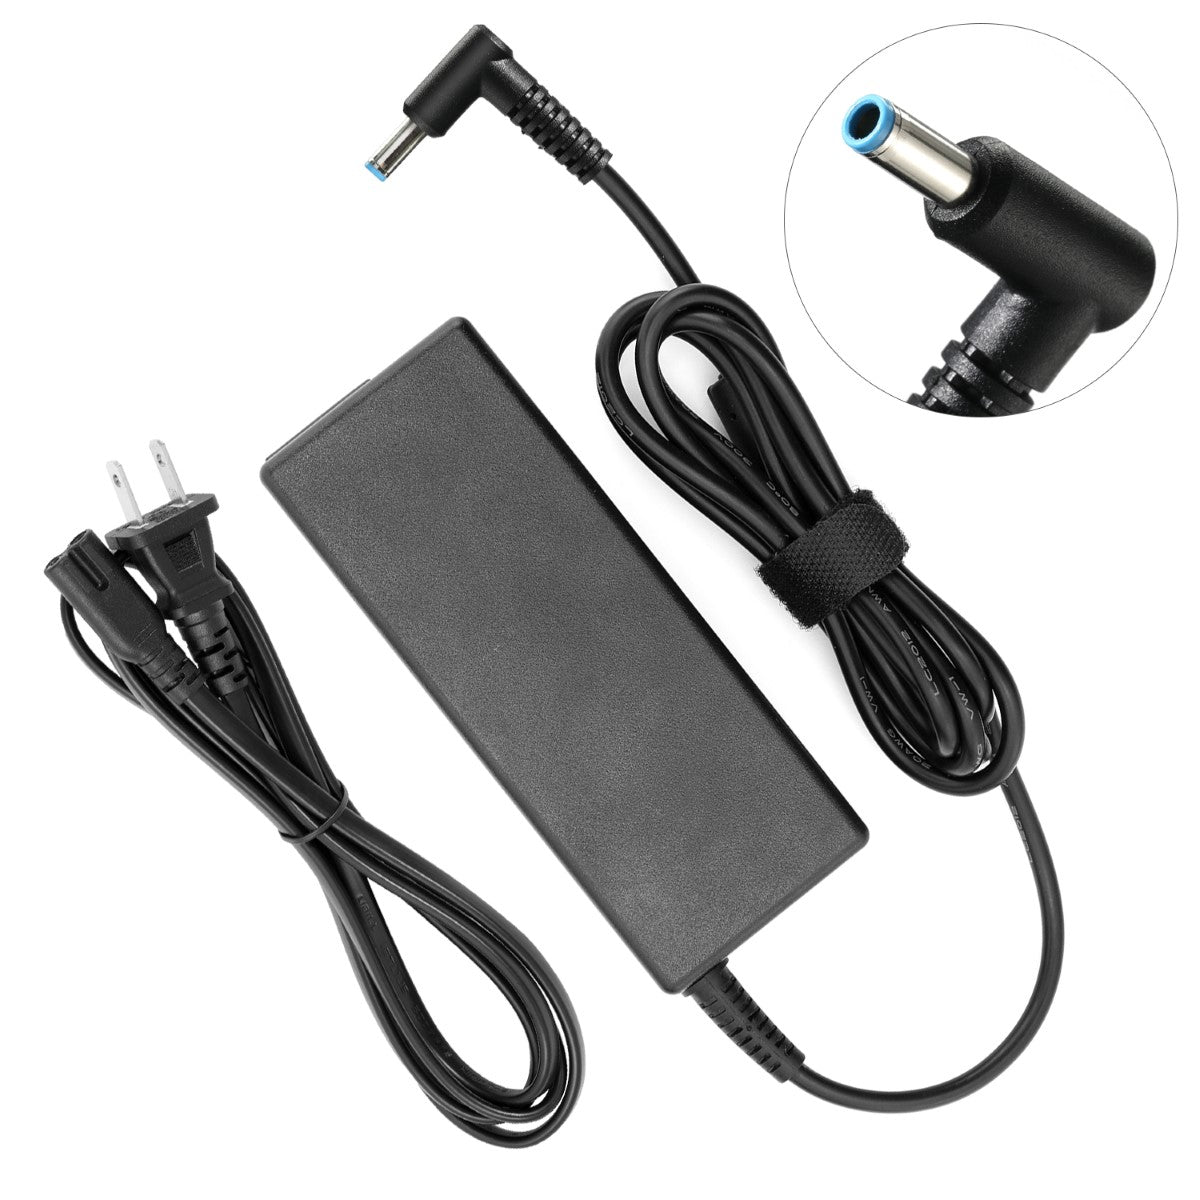 AC Adapter Charger for HP 15-g013cl Notebook.